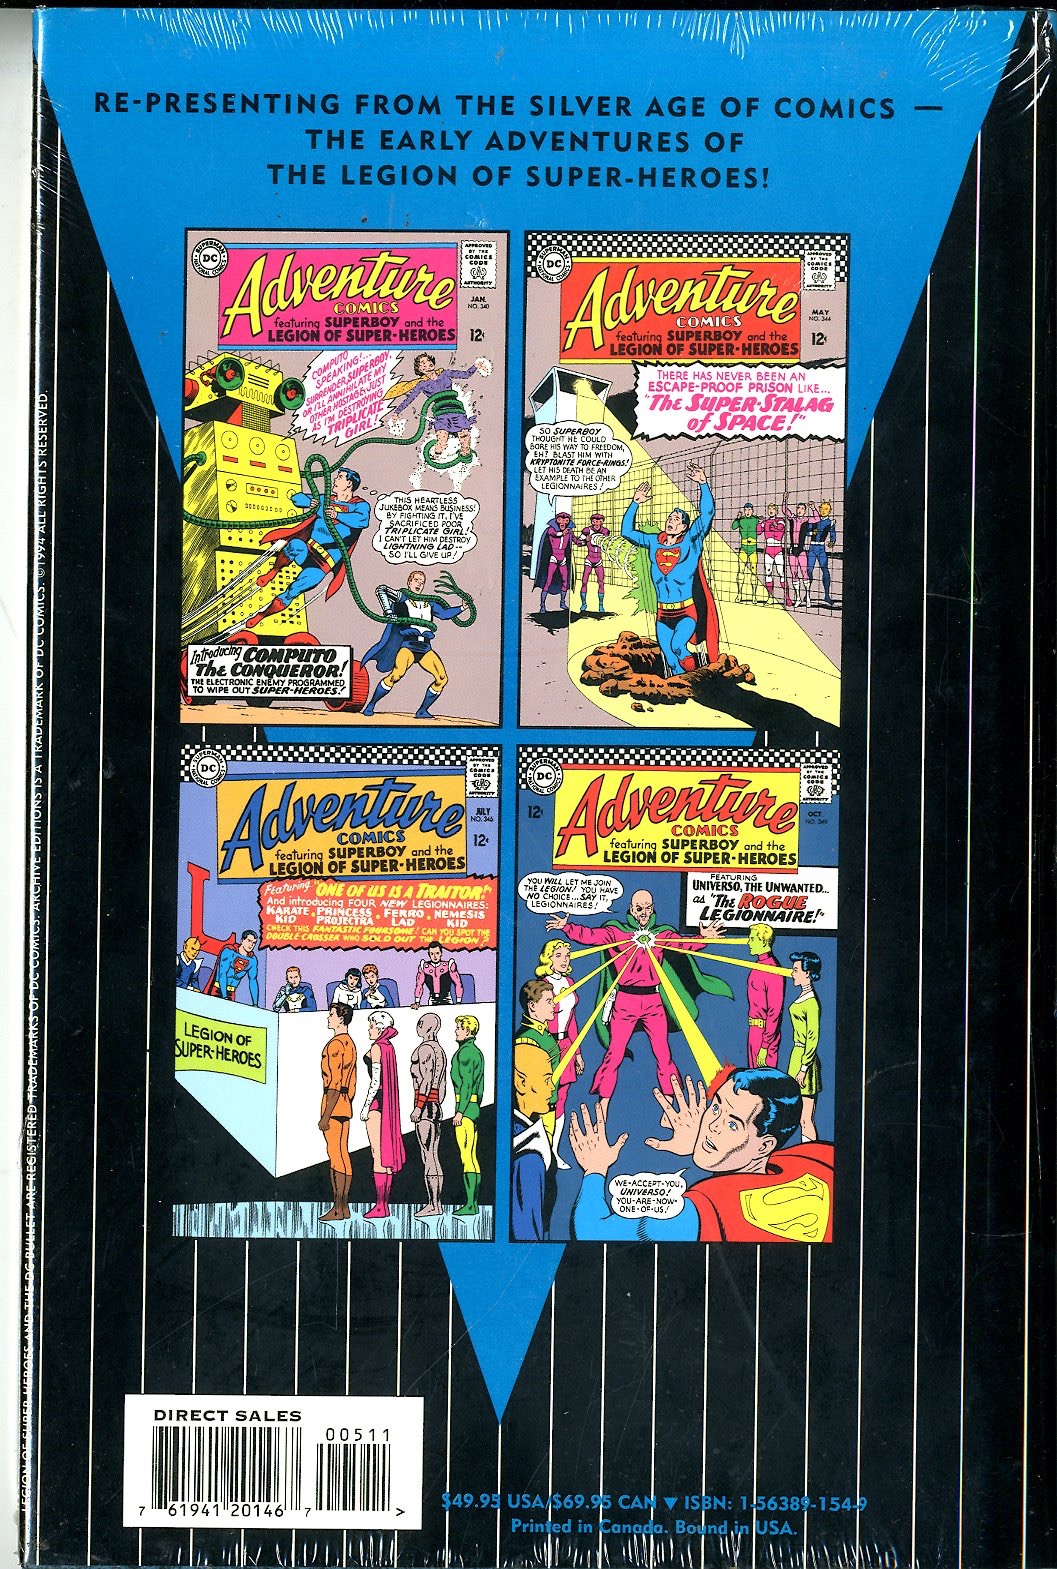 Archive Editions Legion Of Super-heroes - 11250